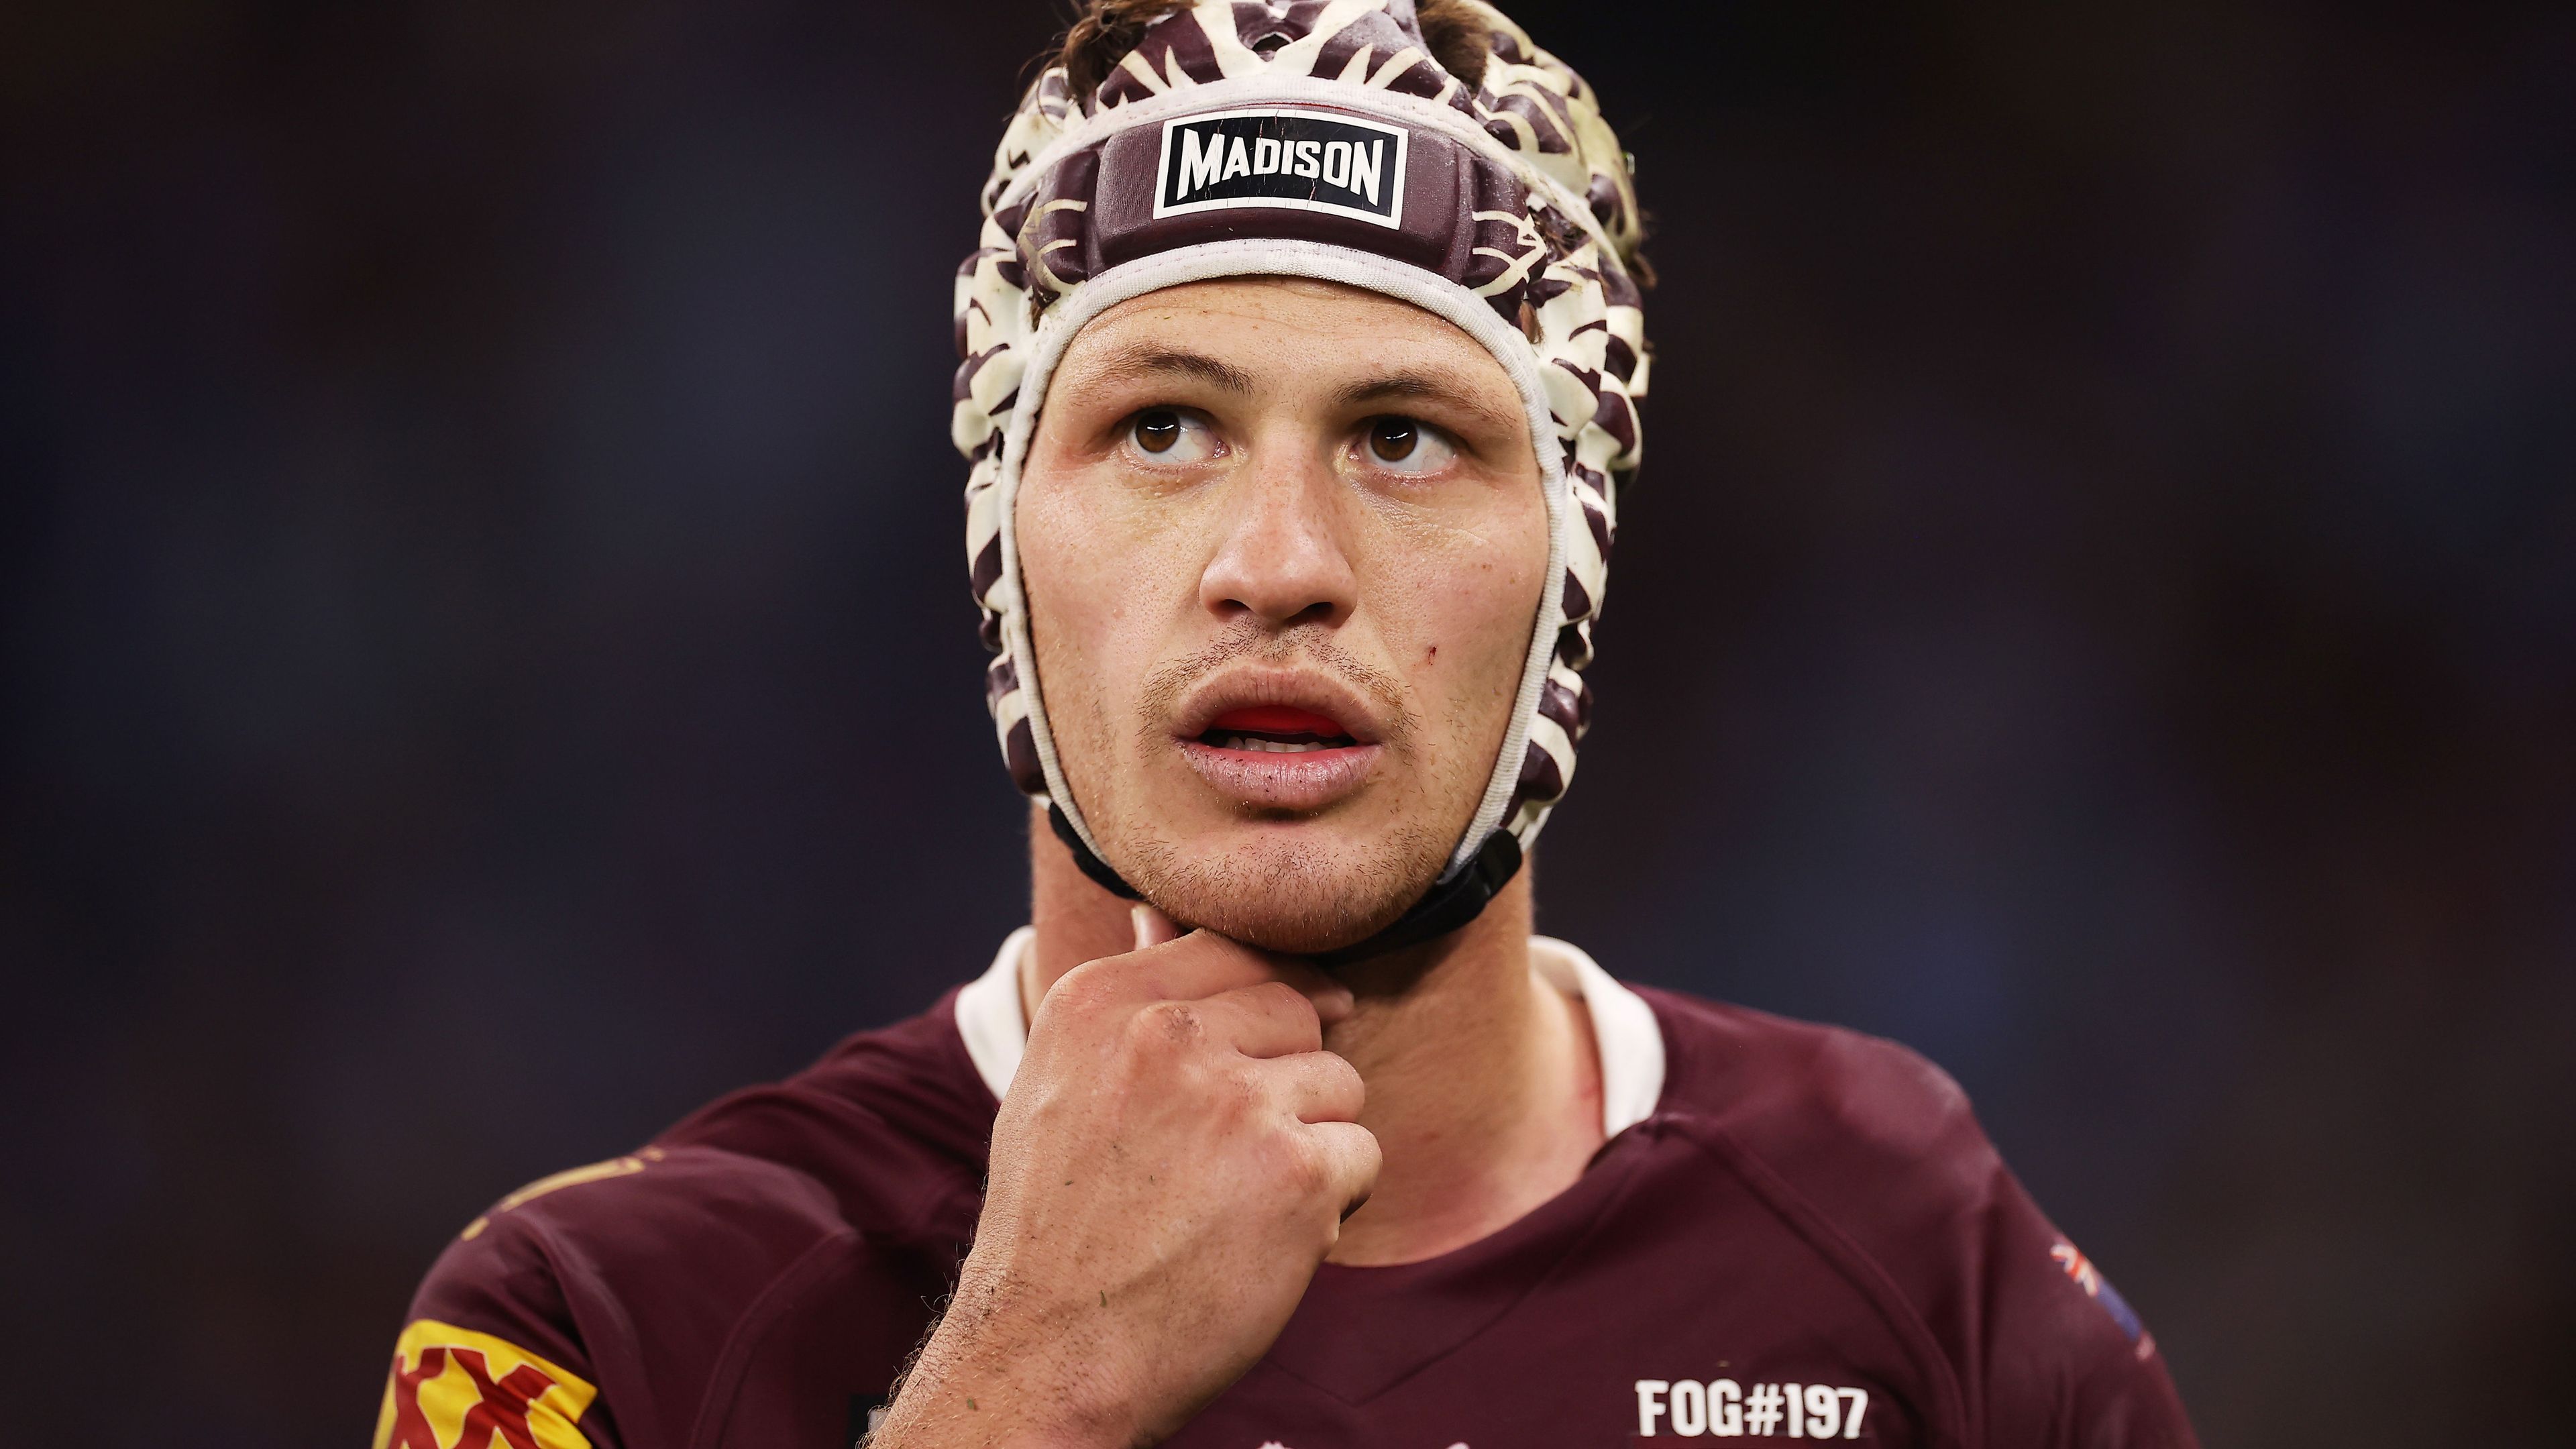 Kalyn Ponga of the Maroons looks on during game two of the 2022 State of Origin series.